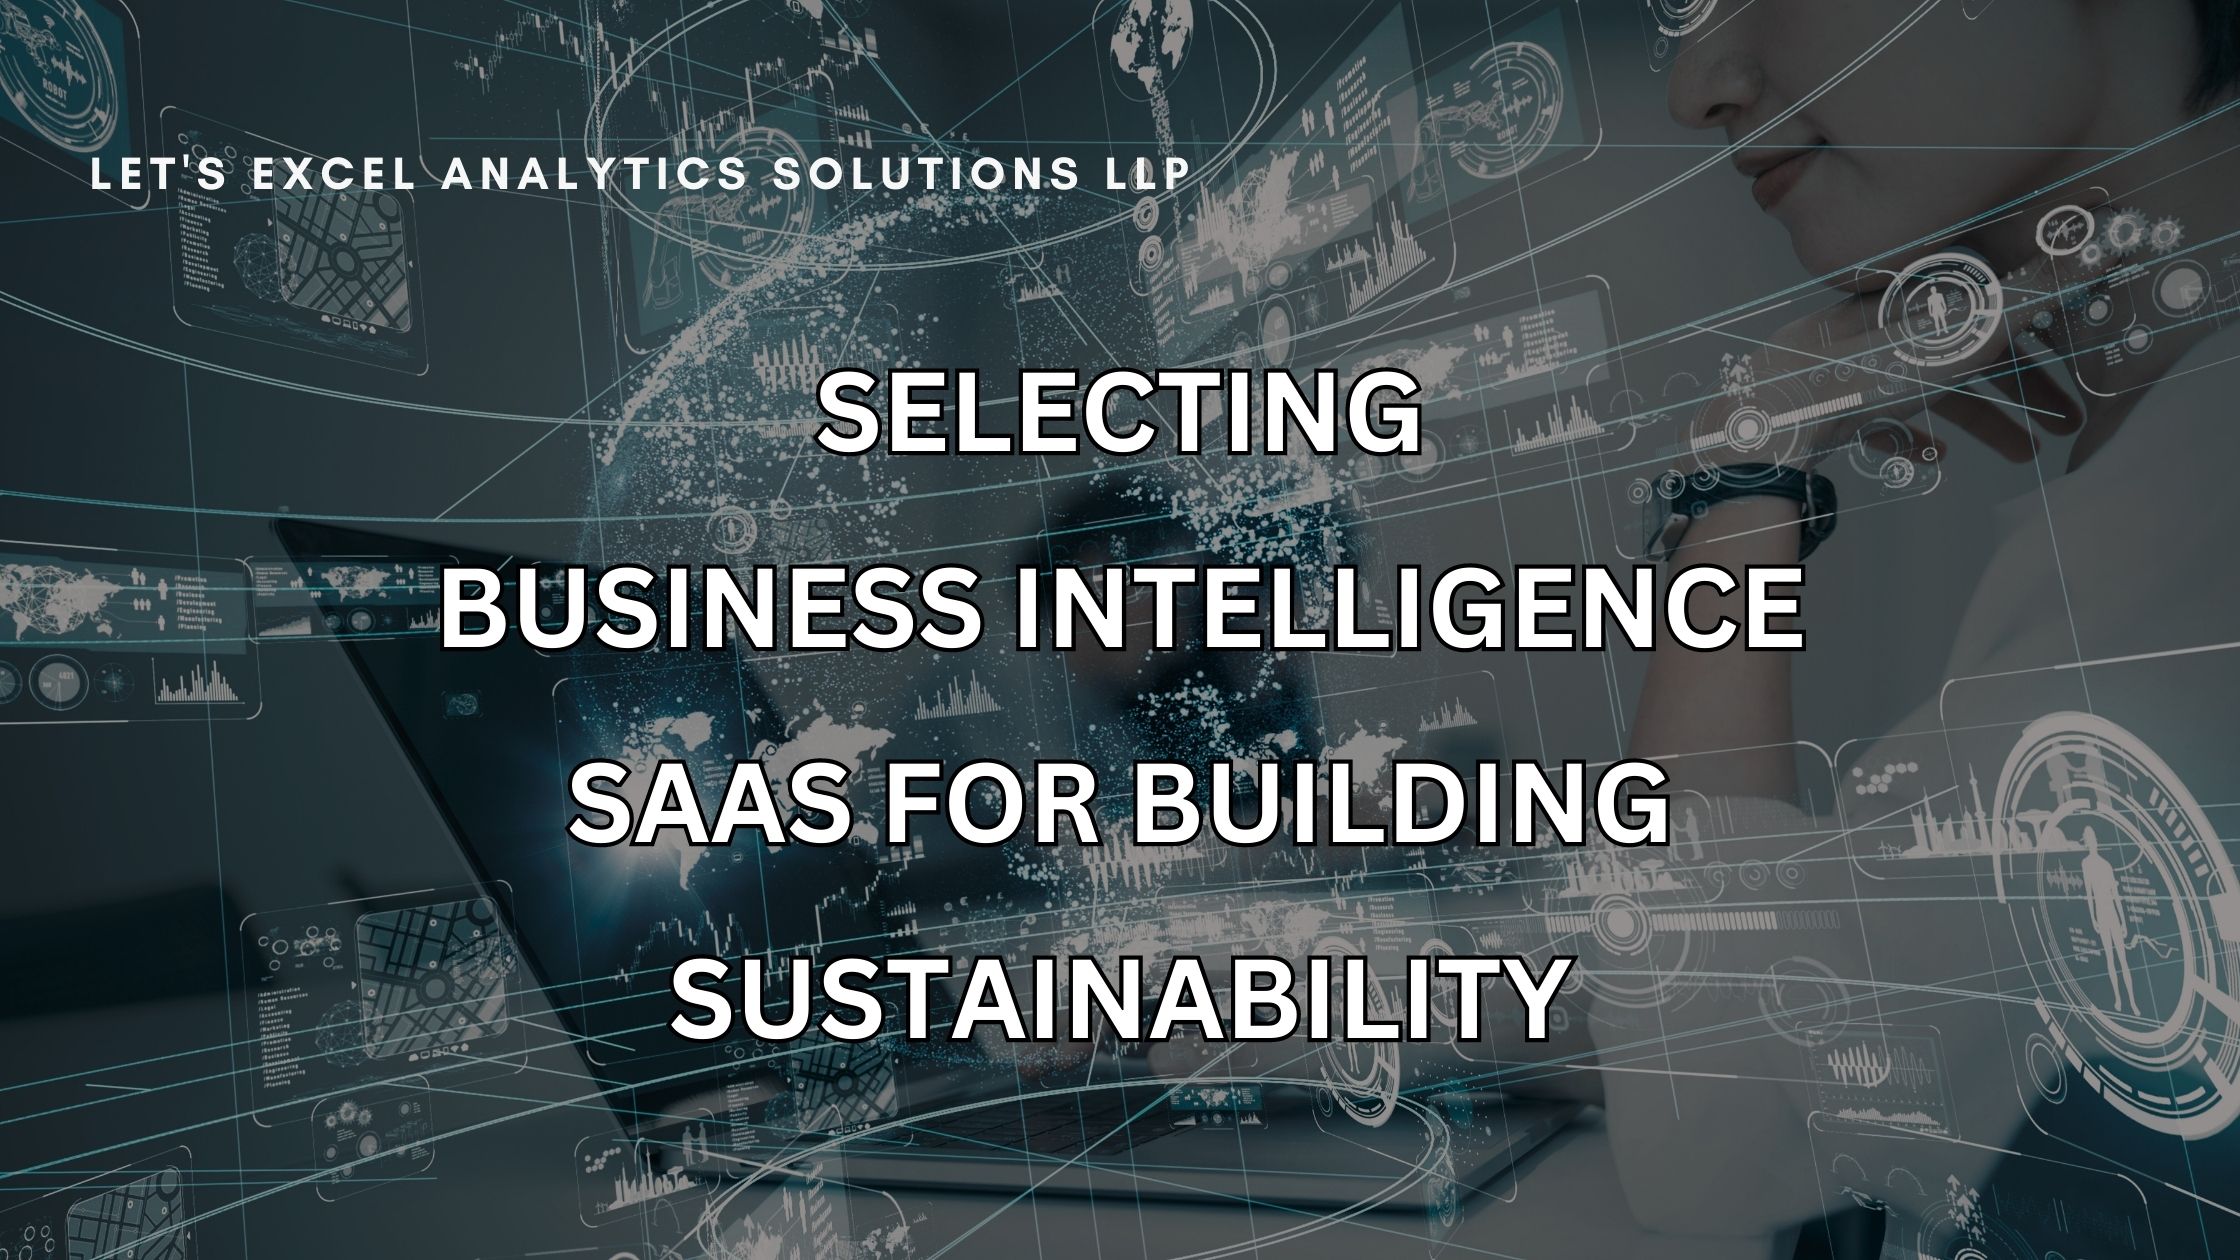 Business SaaS for Sustainabilty